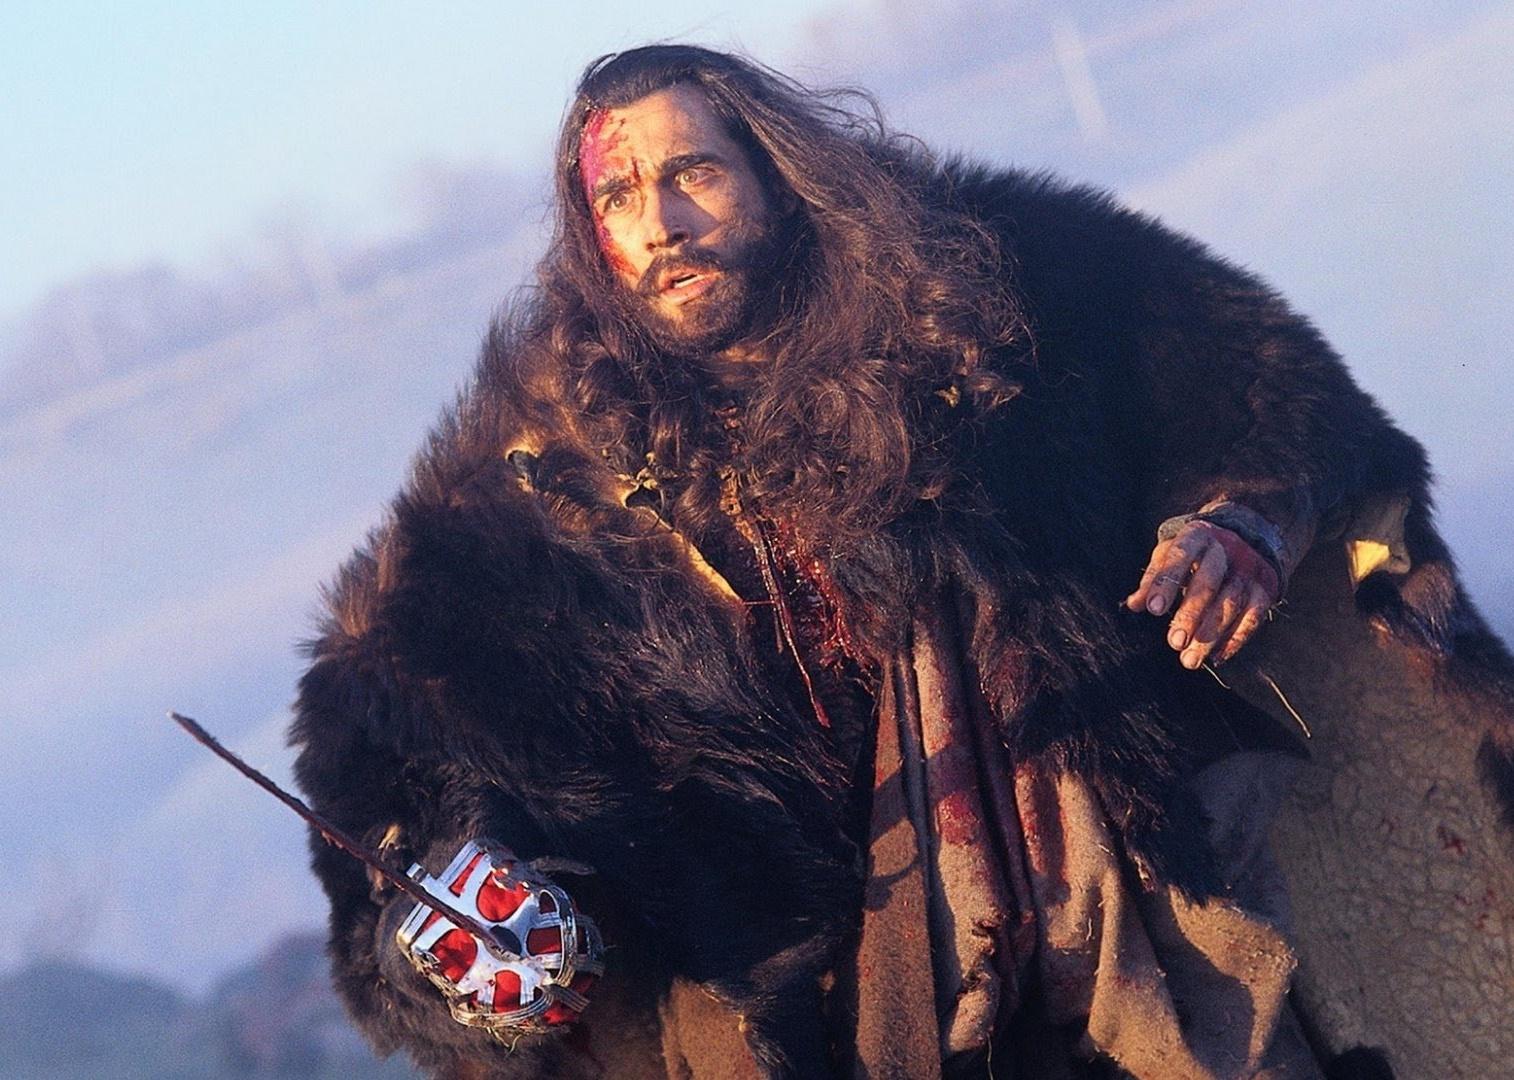 A man with long dark hair wearing a thick fur jacket and blood on his face holds a sword.